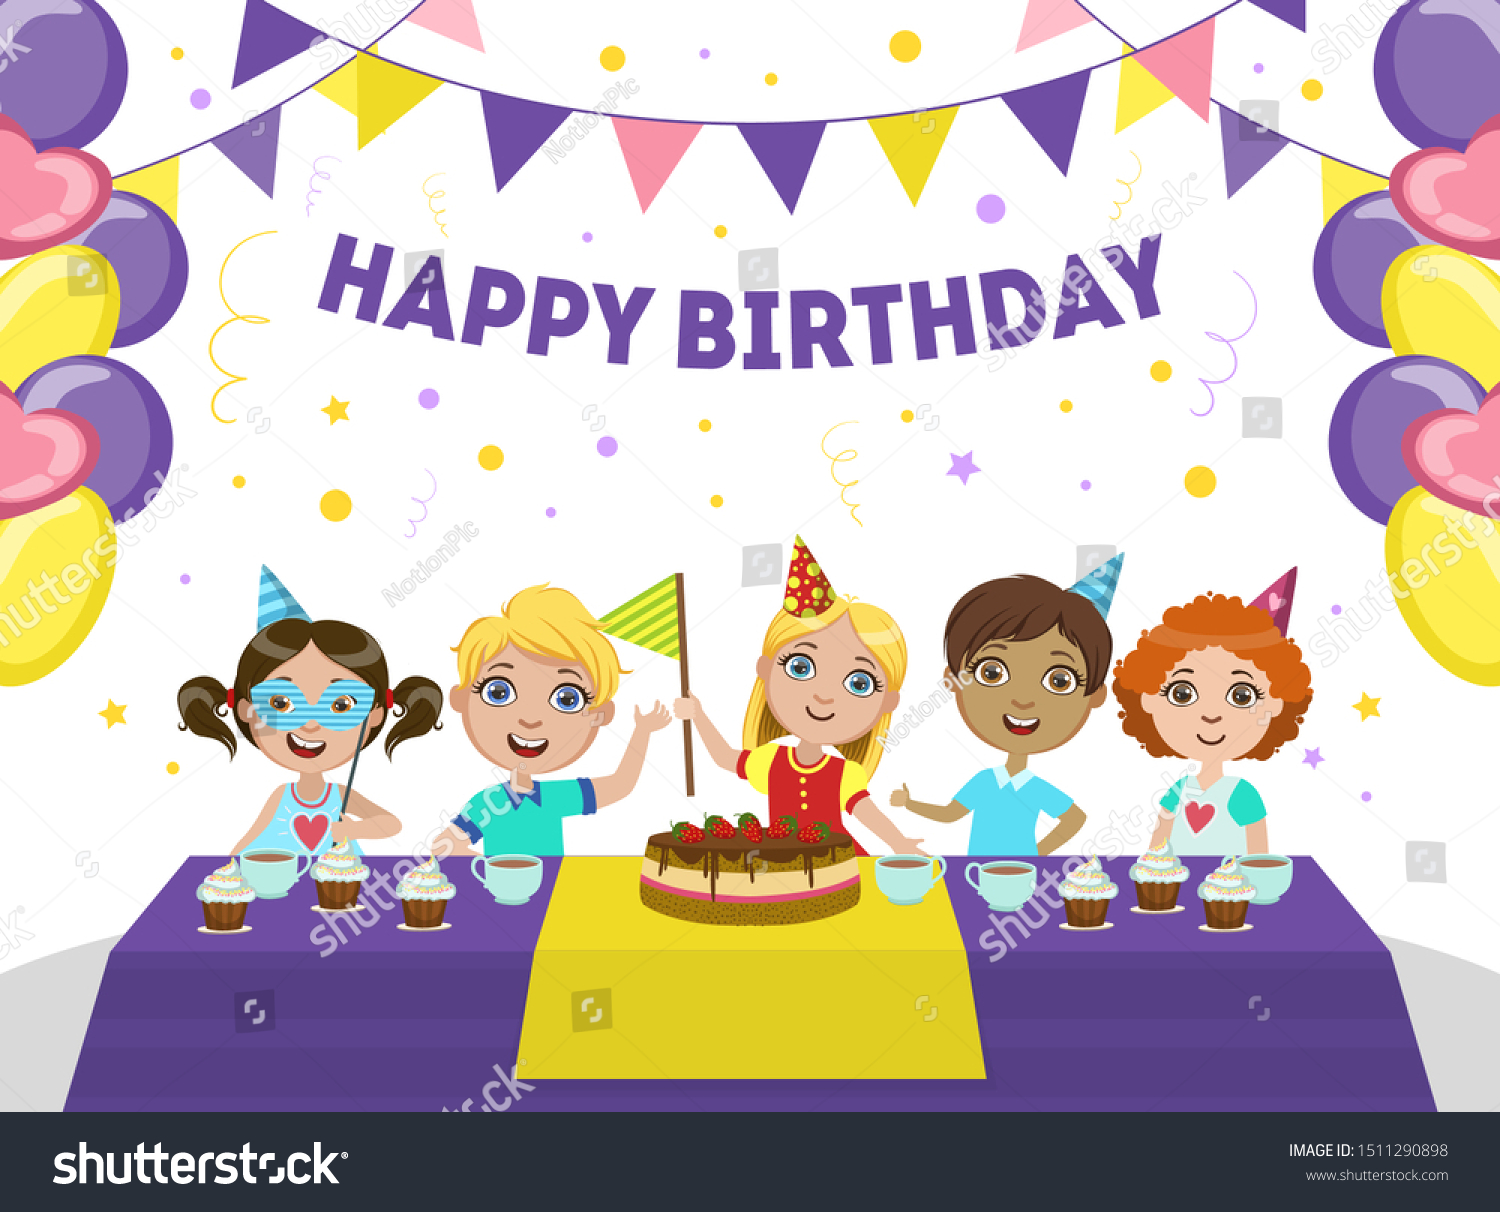 Happy Birthday Banner Template from image.shutterstock.com